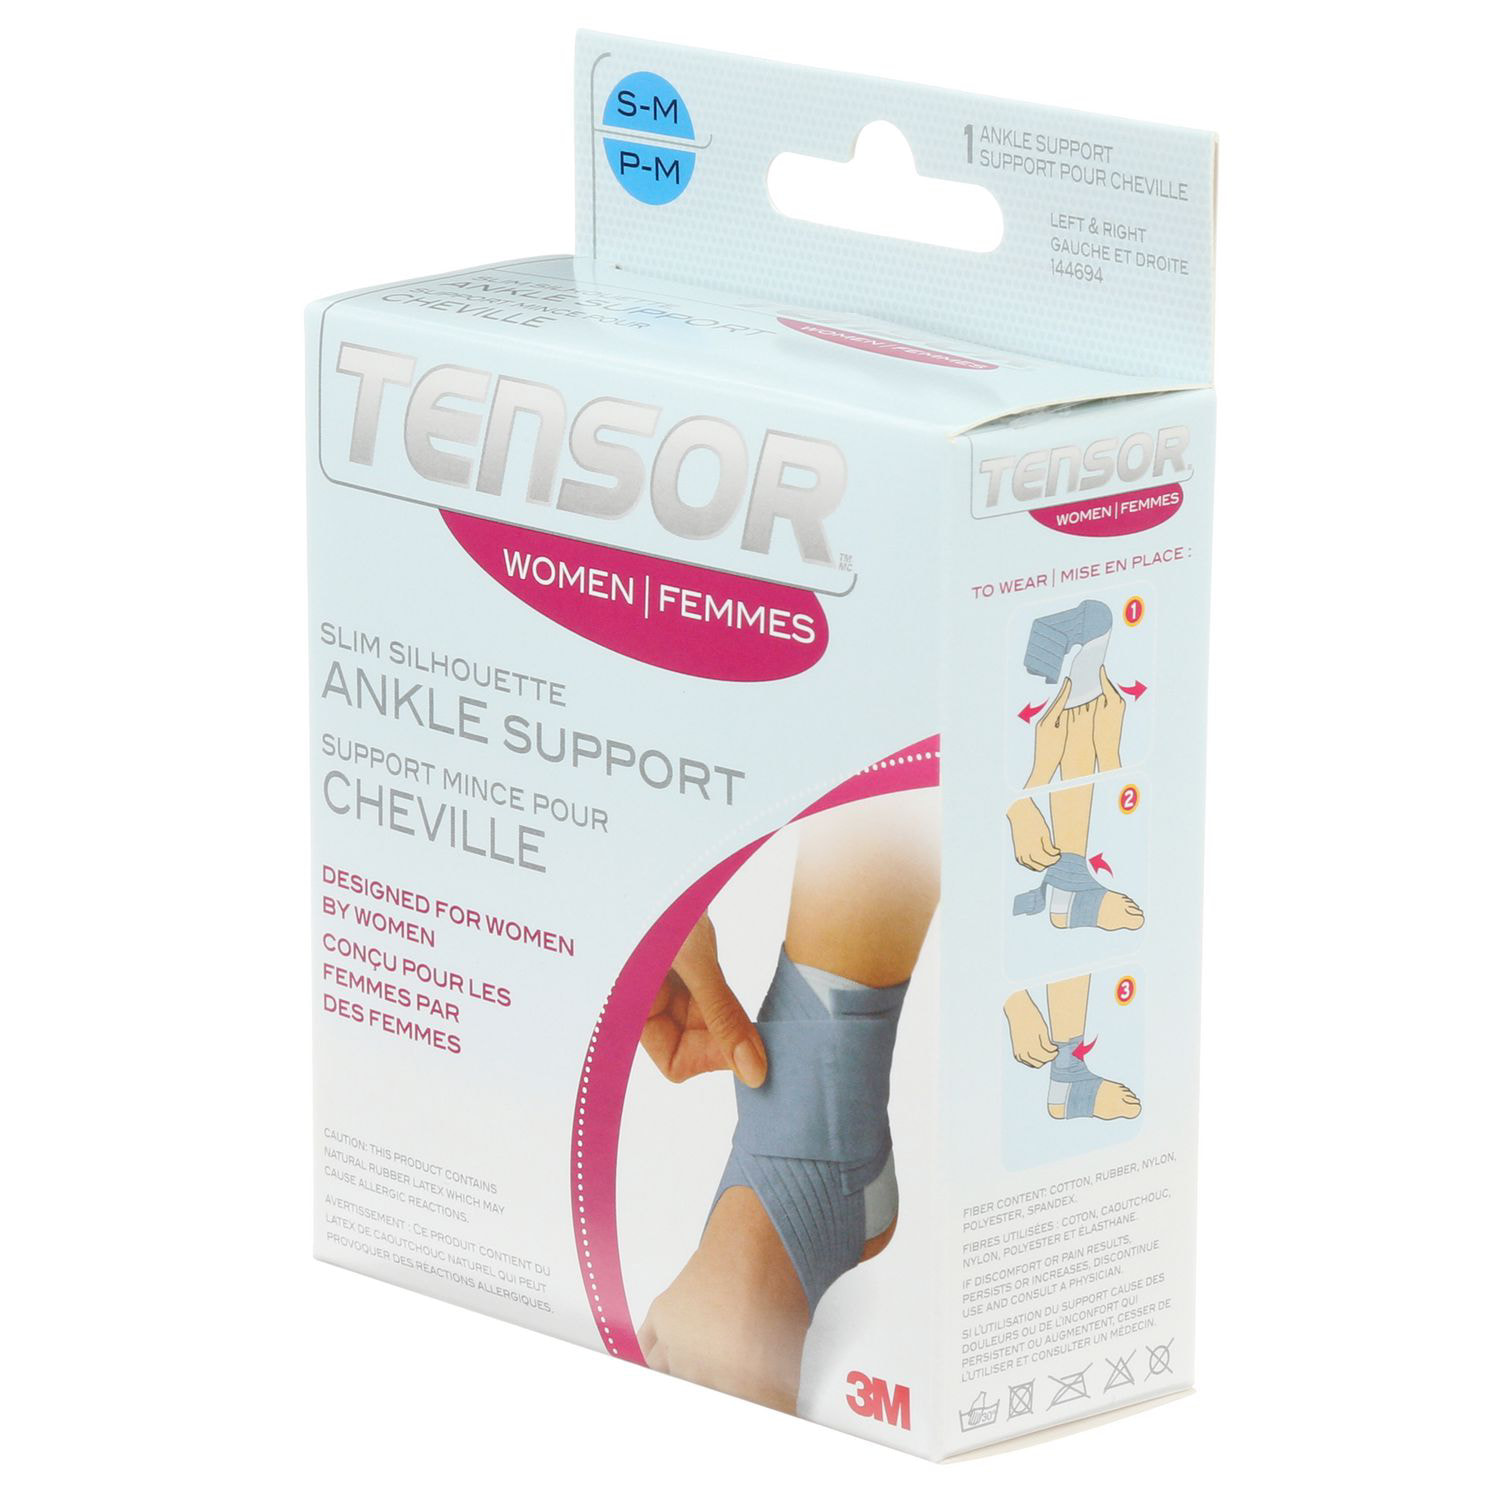 Tensor Women's Ankle Support, S/M